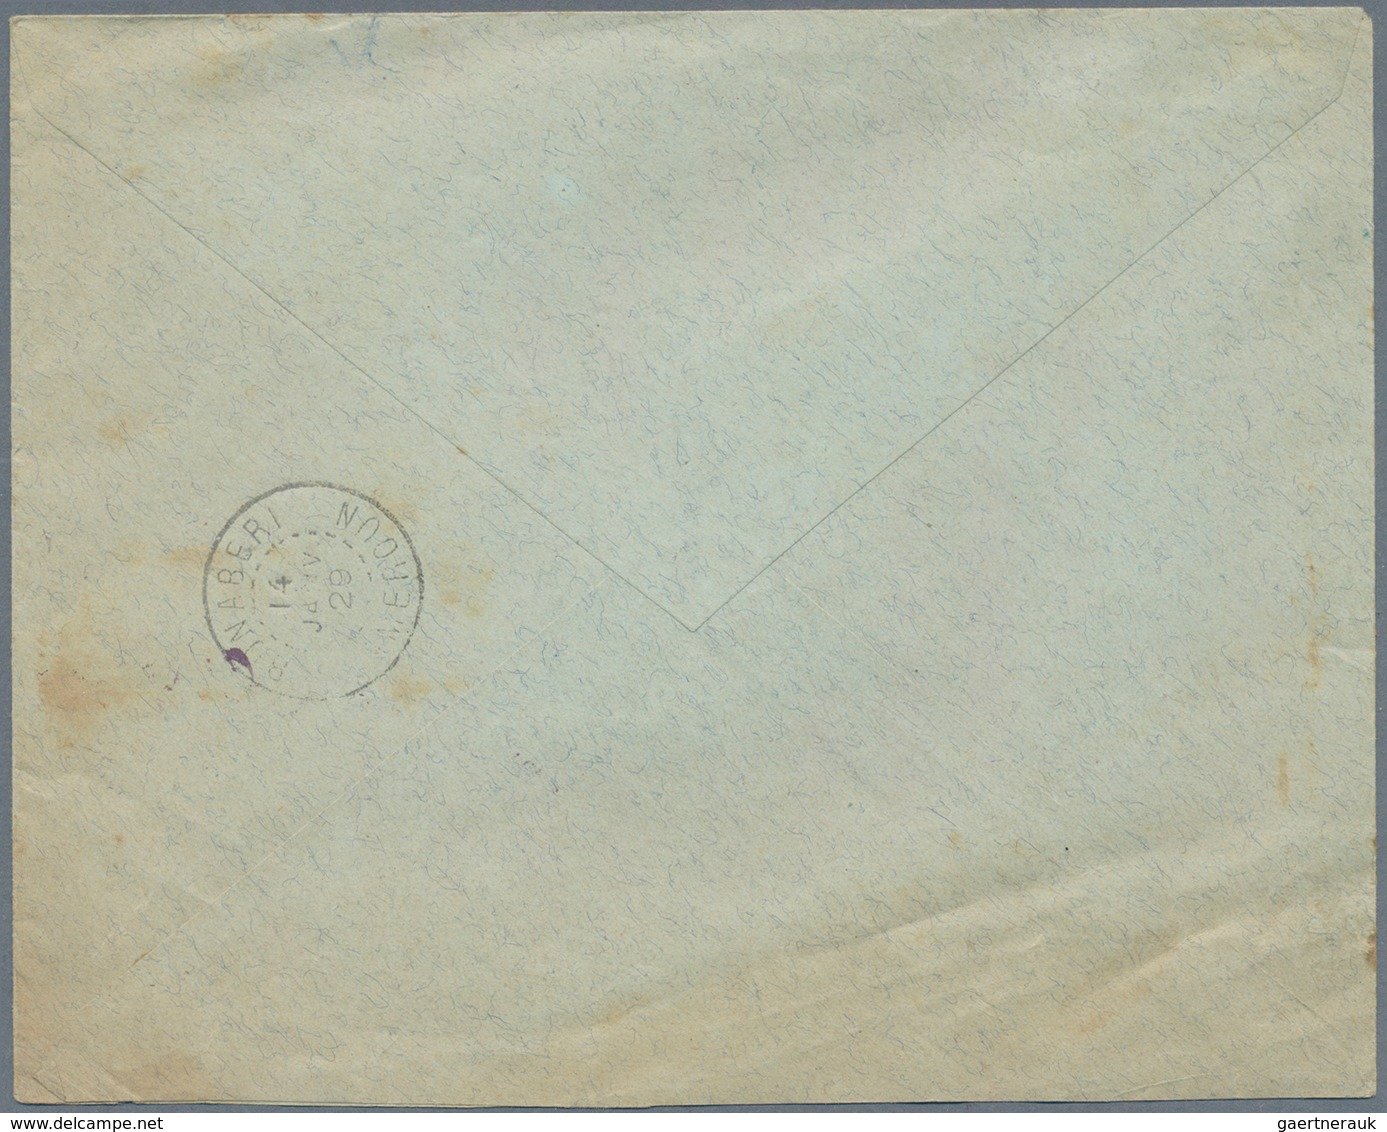 Kamerun: 1929 BISECTED 1 FRANC Cancelled By "NYOMBÉ 14. JANV. 29" Cds On Cover To Bonaberi. Manuscri - Cameroon (1960-...)